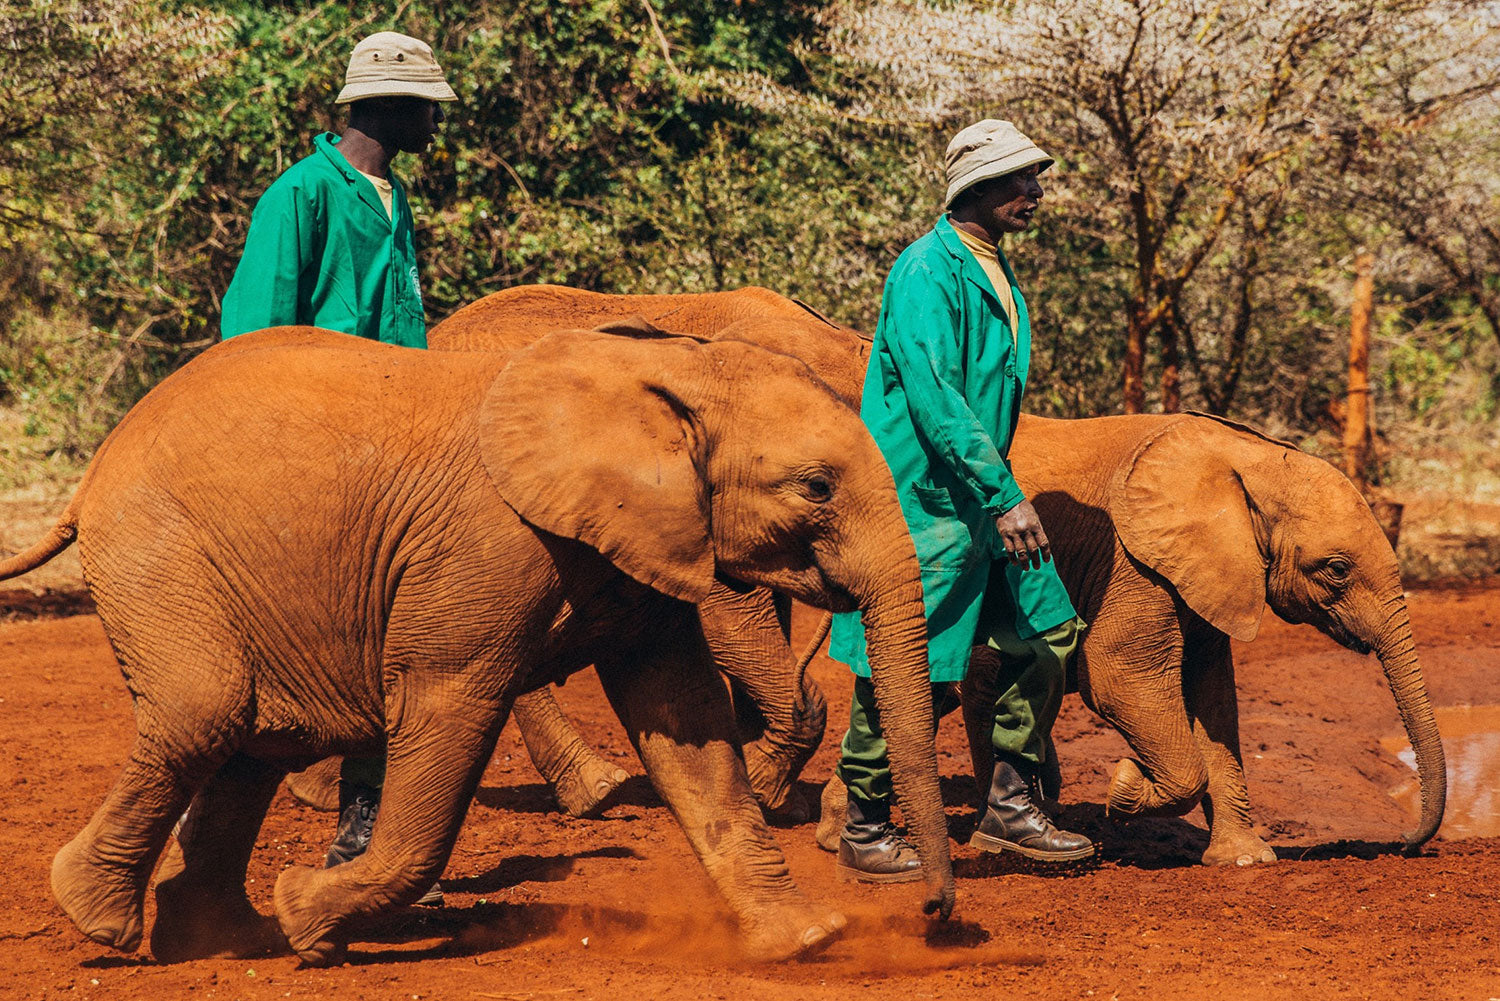 Relief organisation for elephants in need